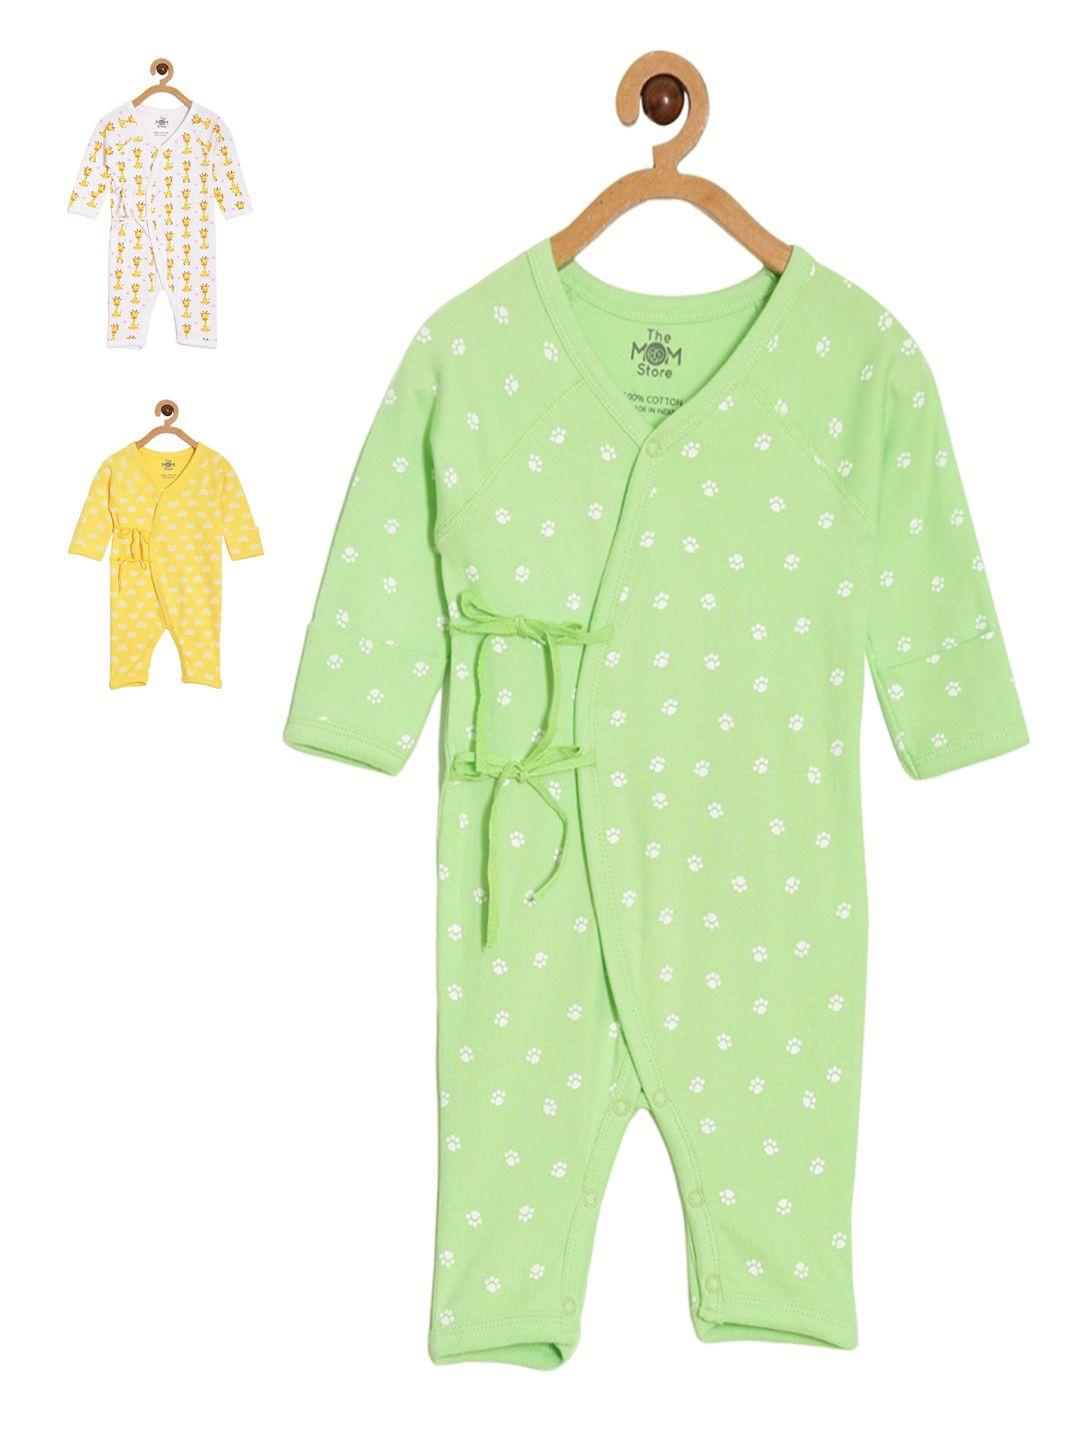 the-mom-store-infants-pack-of-3-printed-cotton-rompers